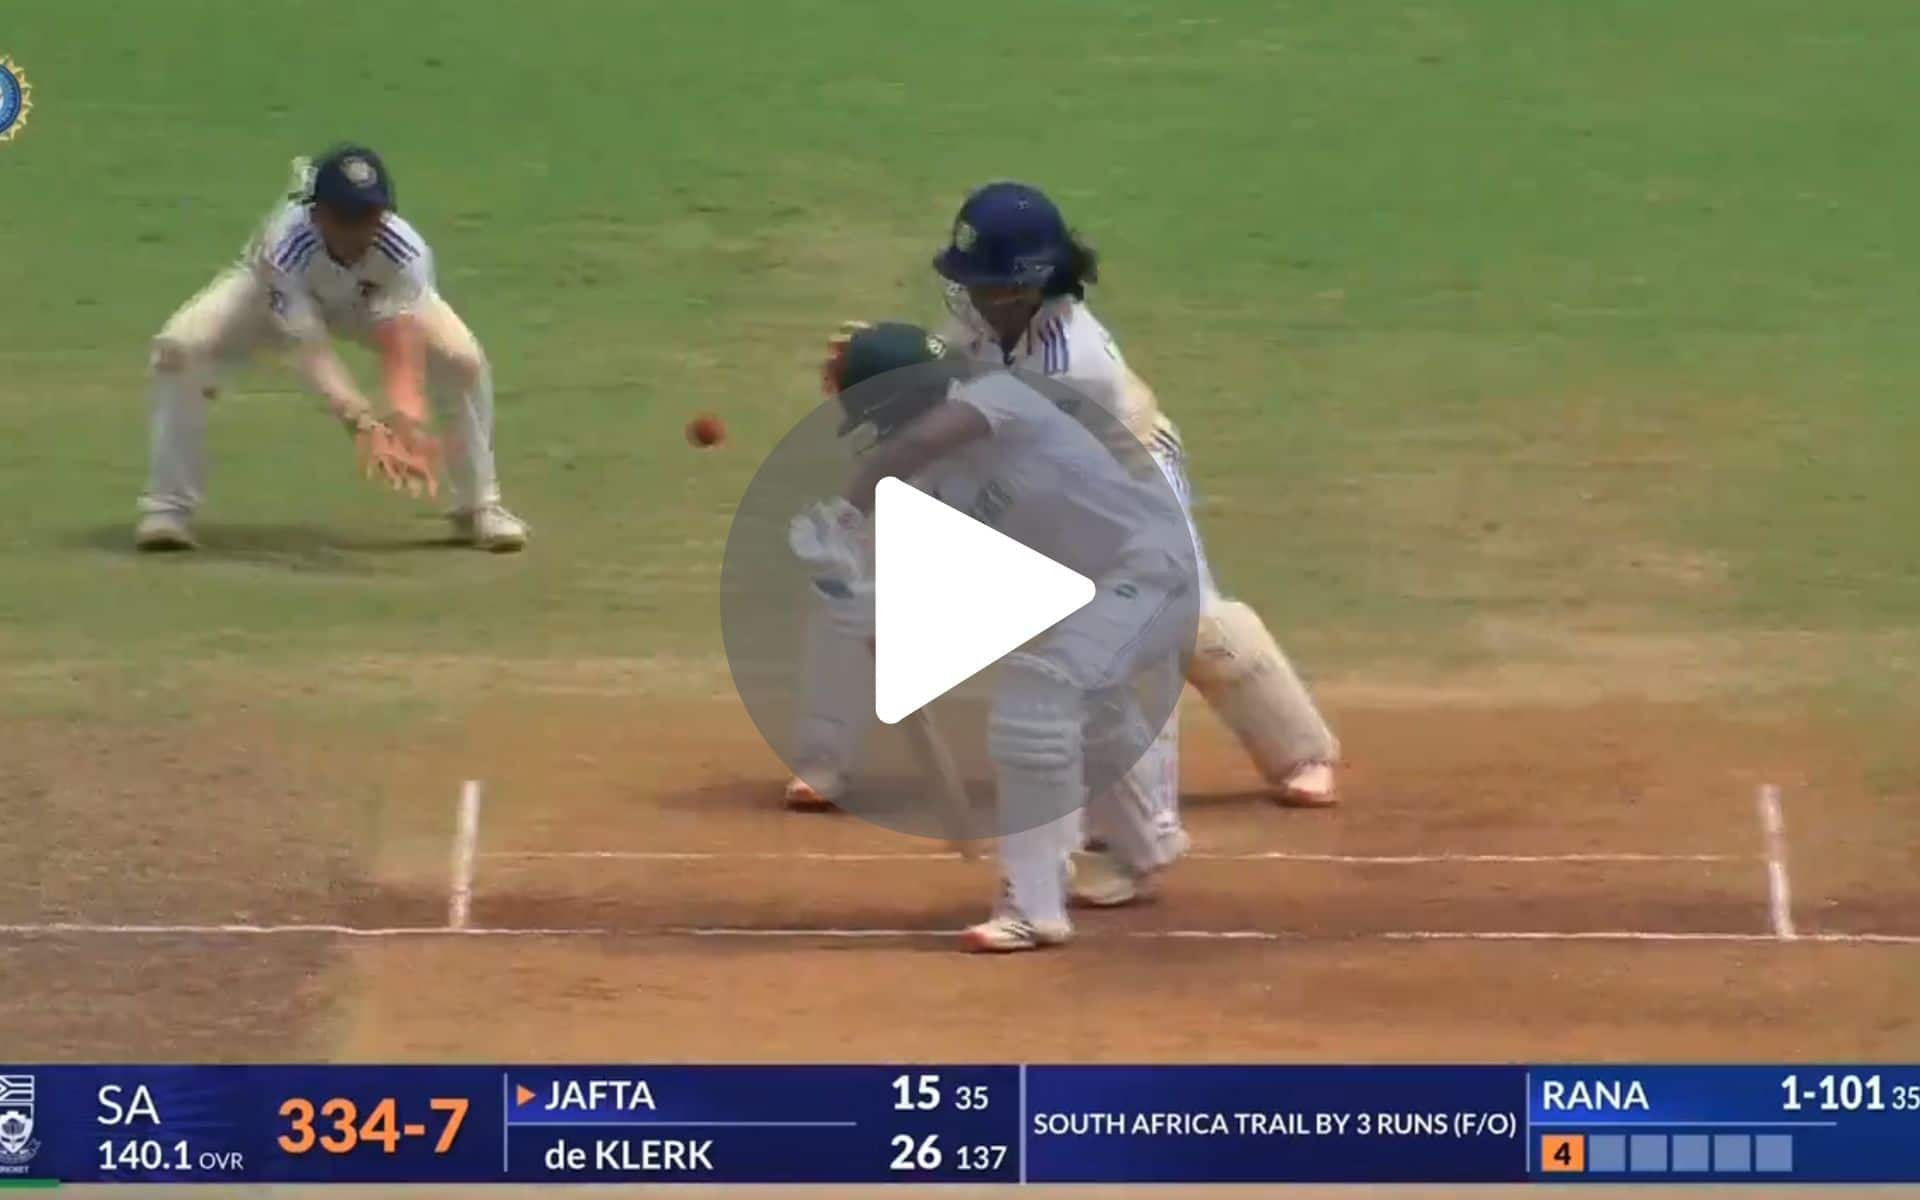 [Watch] Sneh Rana Completes Her 10-Wicket Haul In Match As Satheesh Takes A Sharp Catch